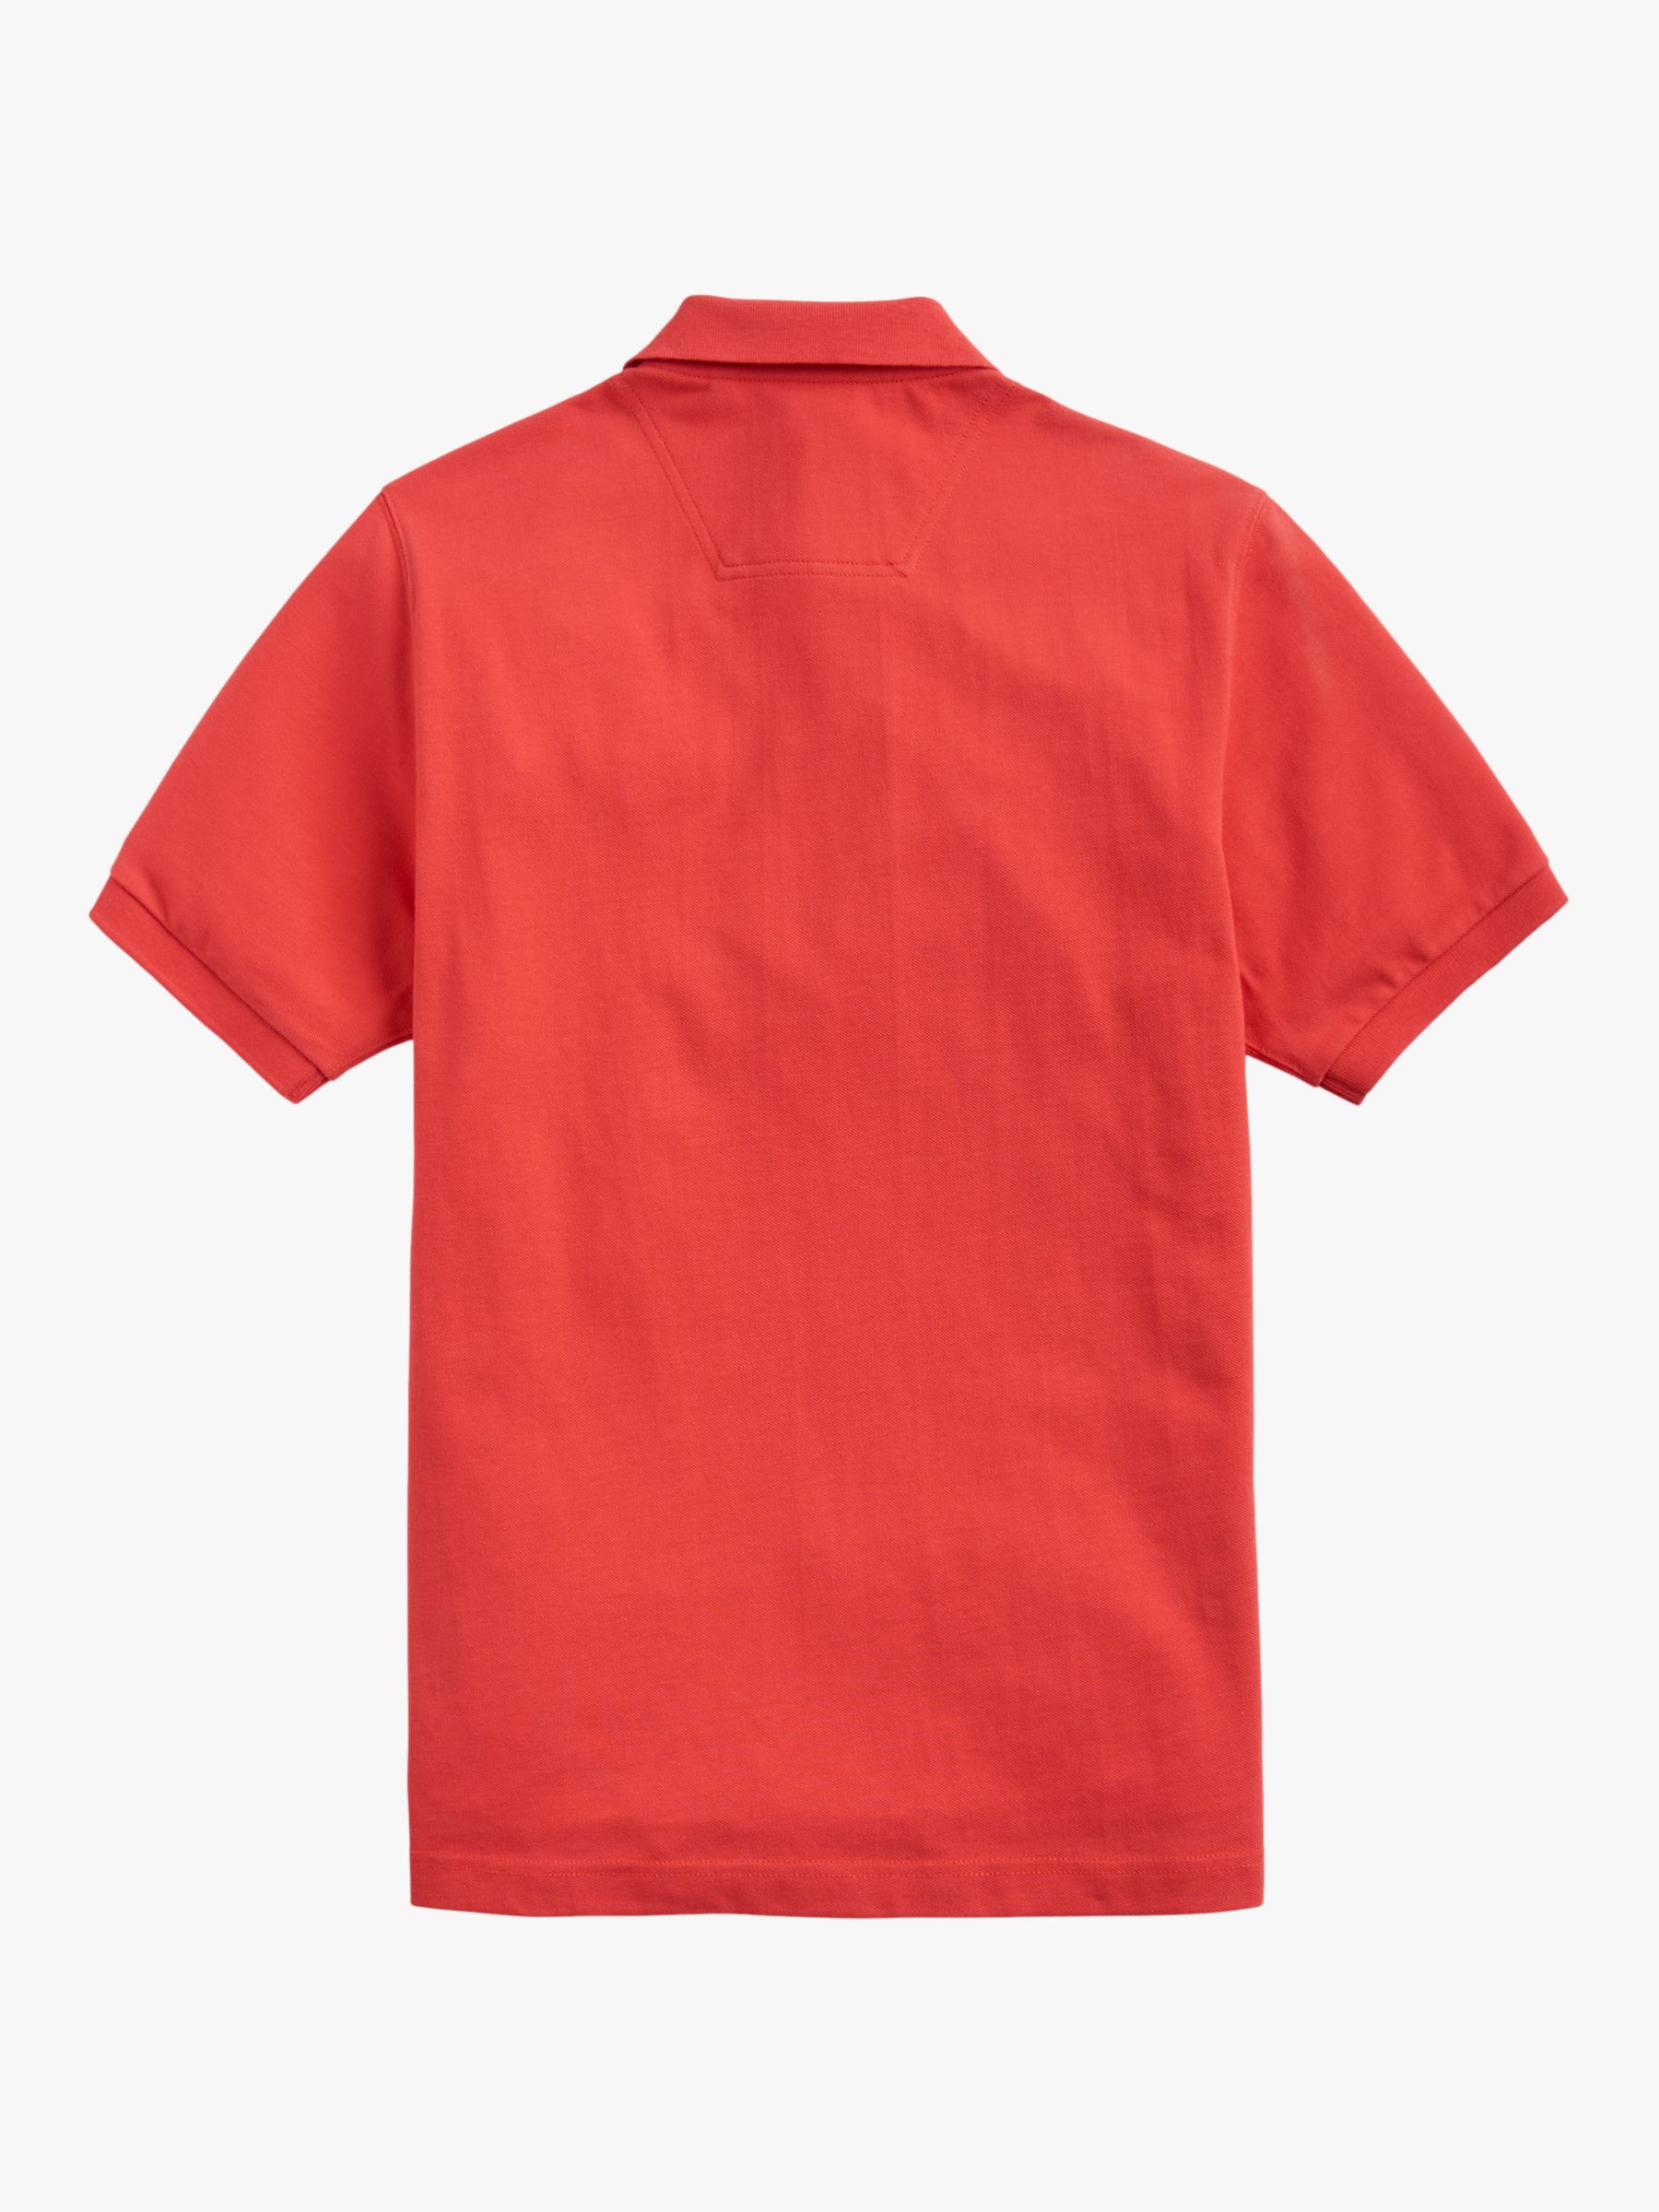 Joules Woody Classic Polo Shirt, Red at John Lewis & Partners